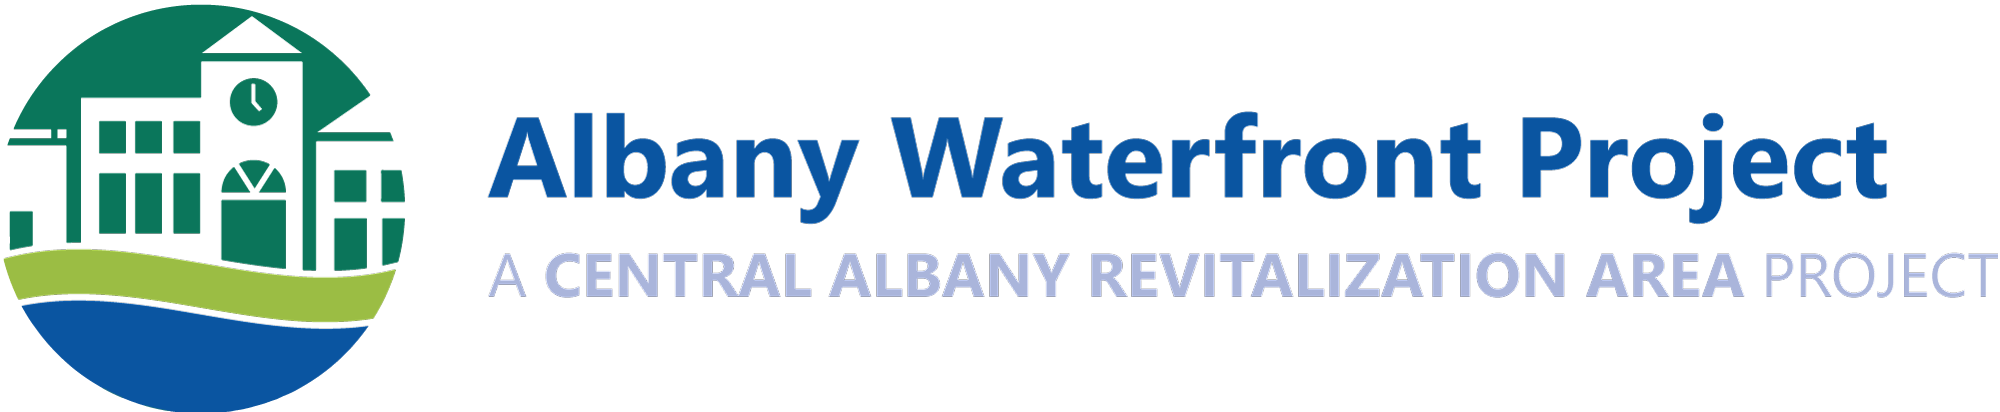 Albany Waterfront Project